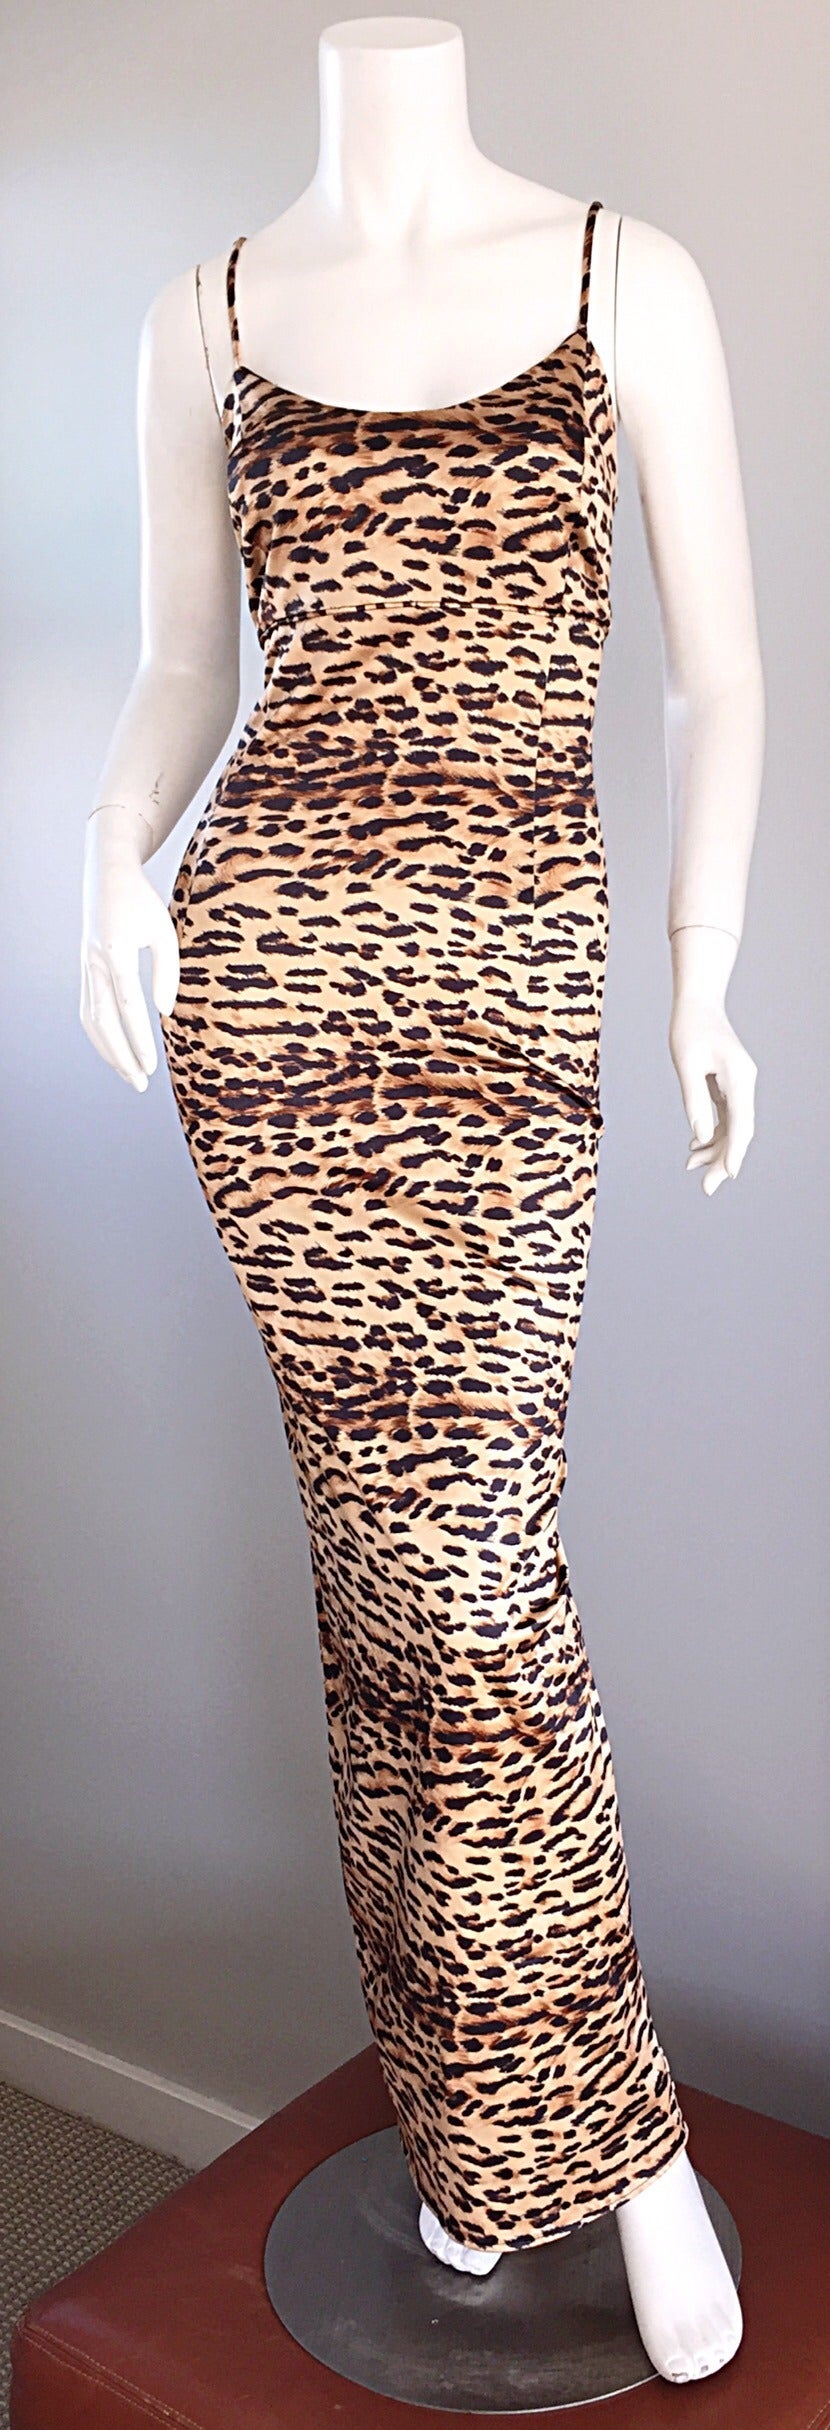 Iconic and super rare vintage Dolce & Gabbana leopard print bodycon dress! Super flattering fit, that hugs all the right places. Leopard spaghetti straps. Scoop back. Looks great alone, or belted. A true show stopper! In great condition. Made in